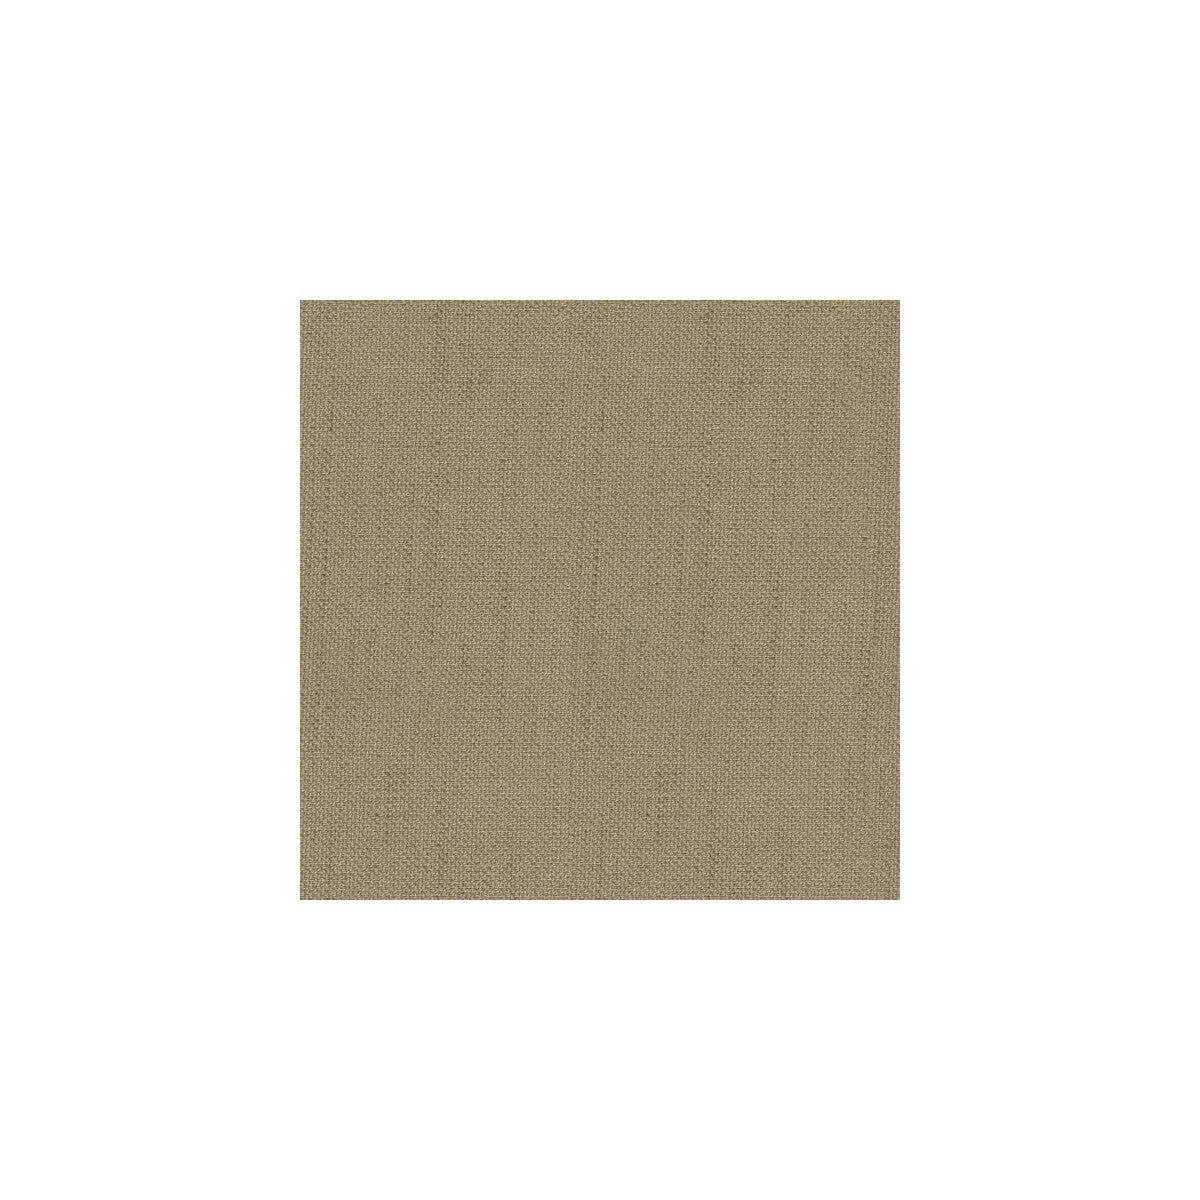 Hudson Solid fabric in natural color - pattern 32304.106.0 - by Kravet Contract